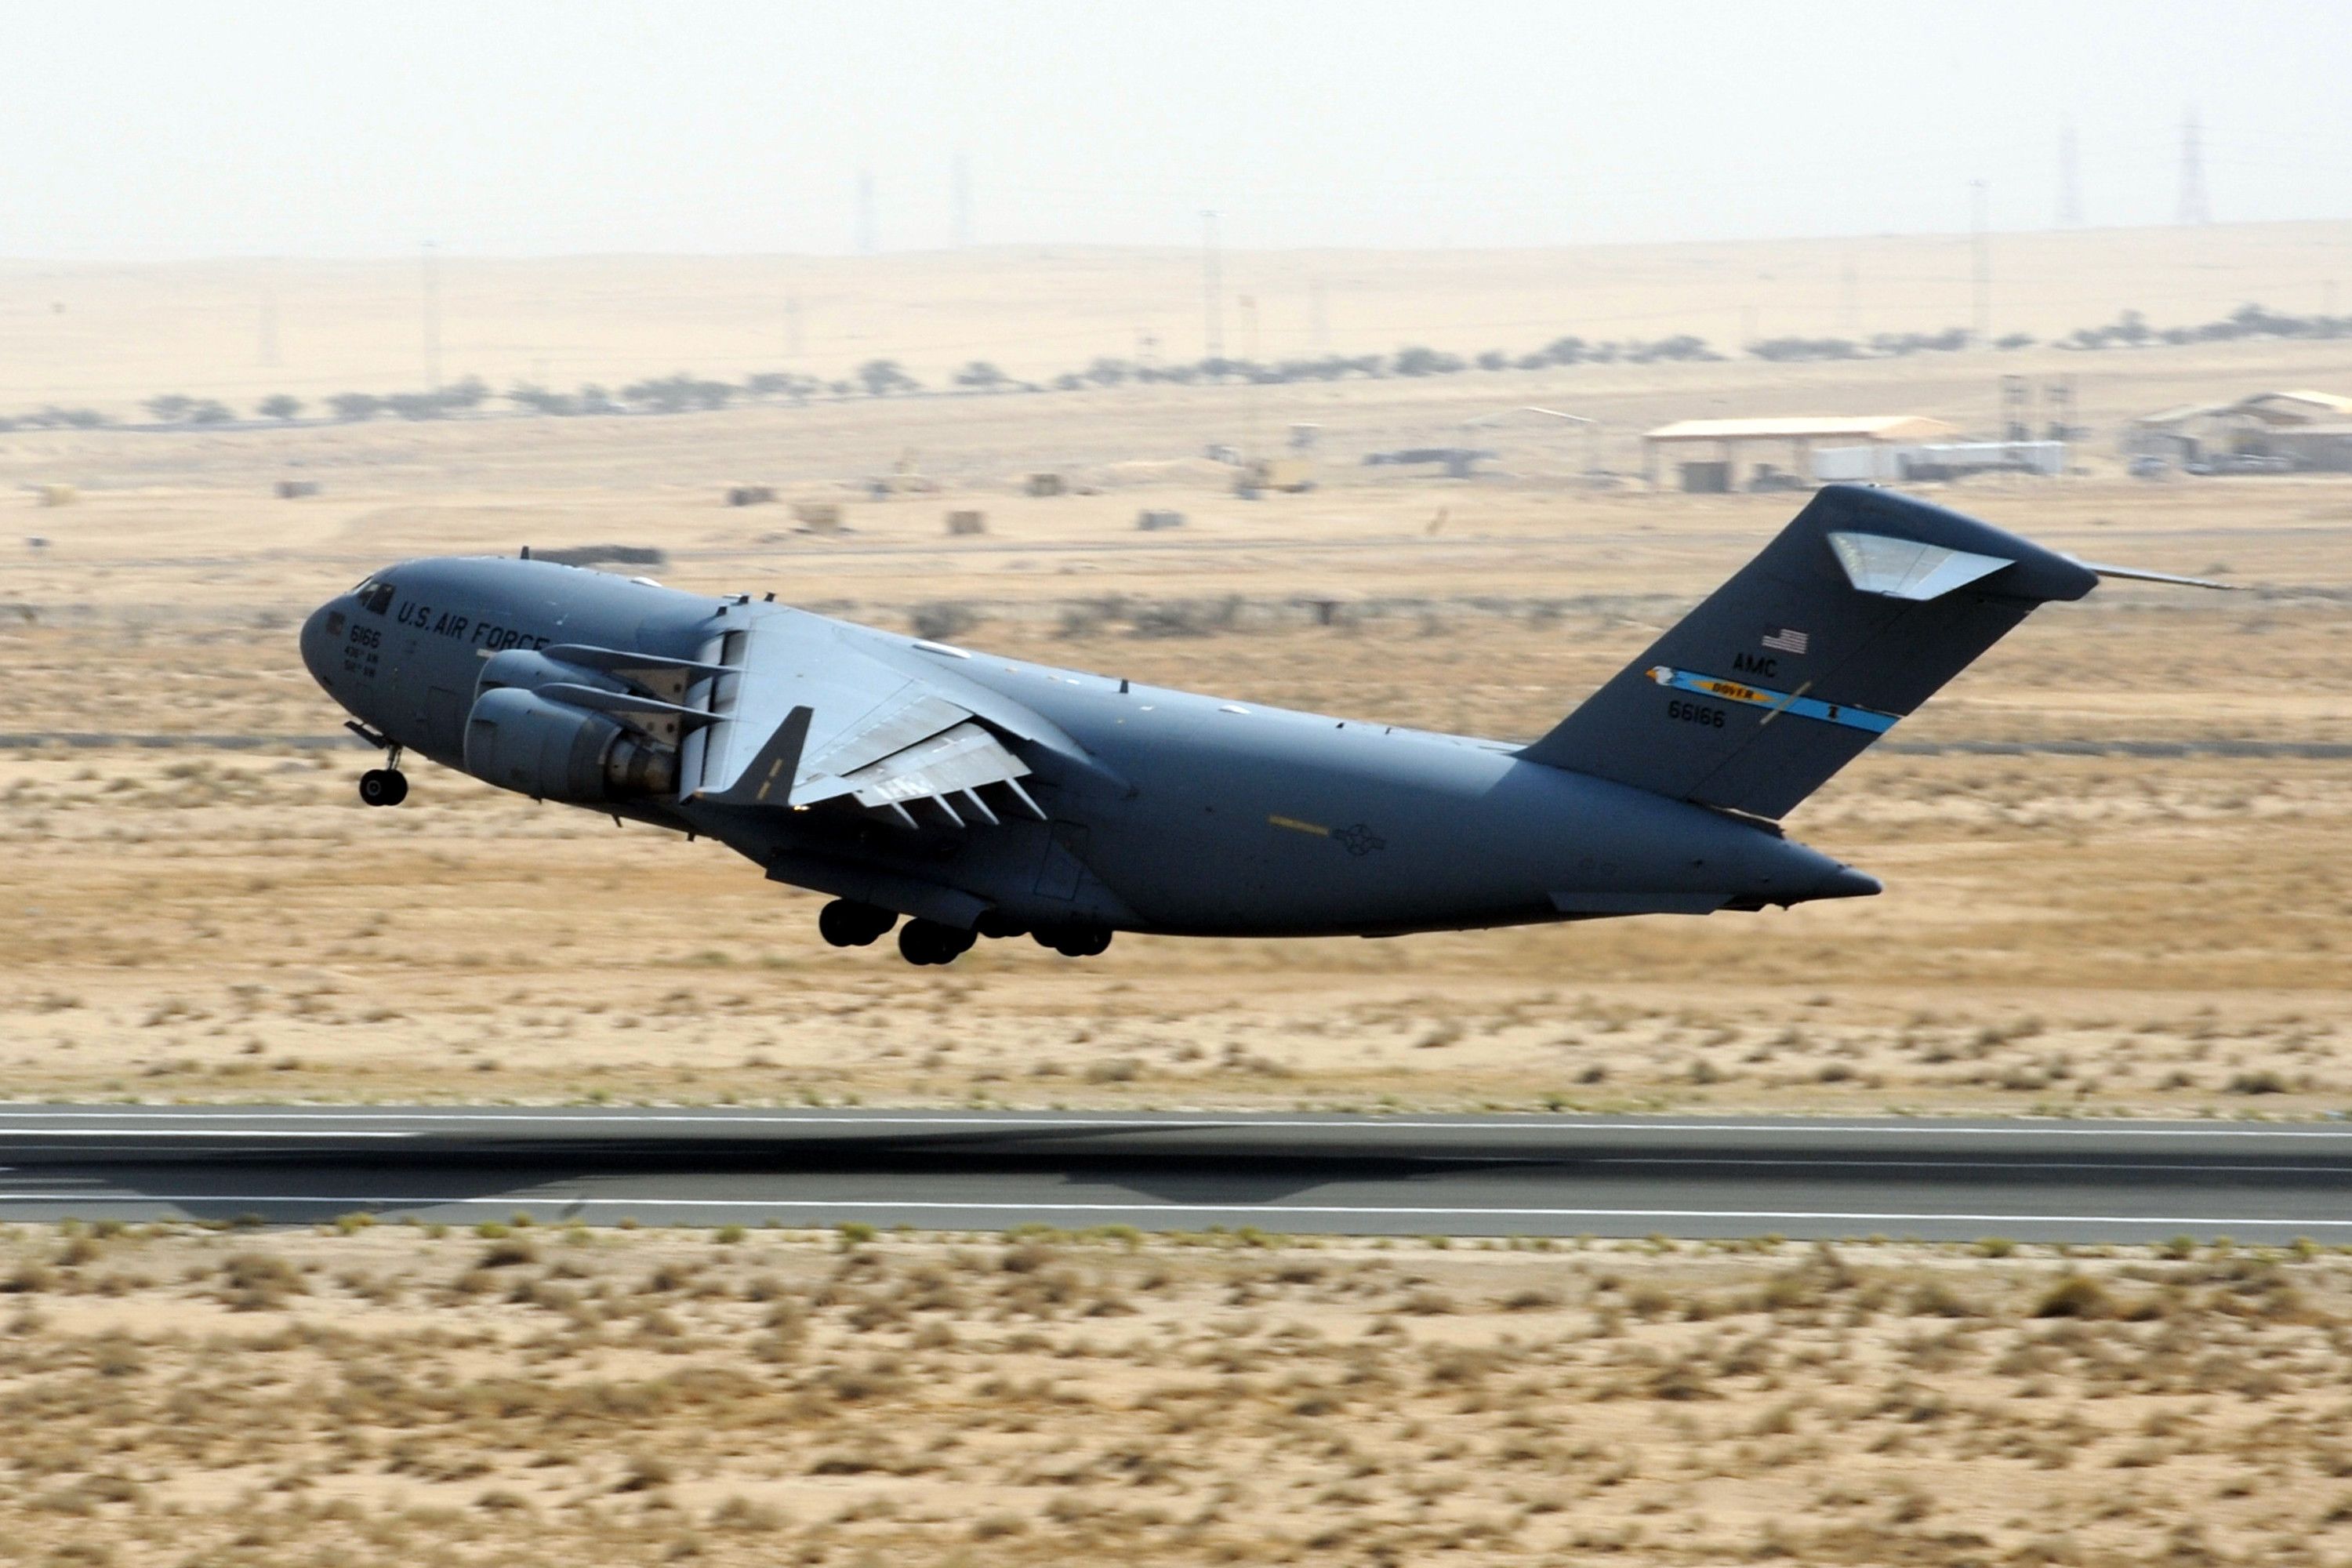 A US Air Force transport aircraft just after taking off.